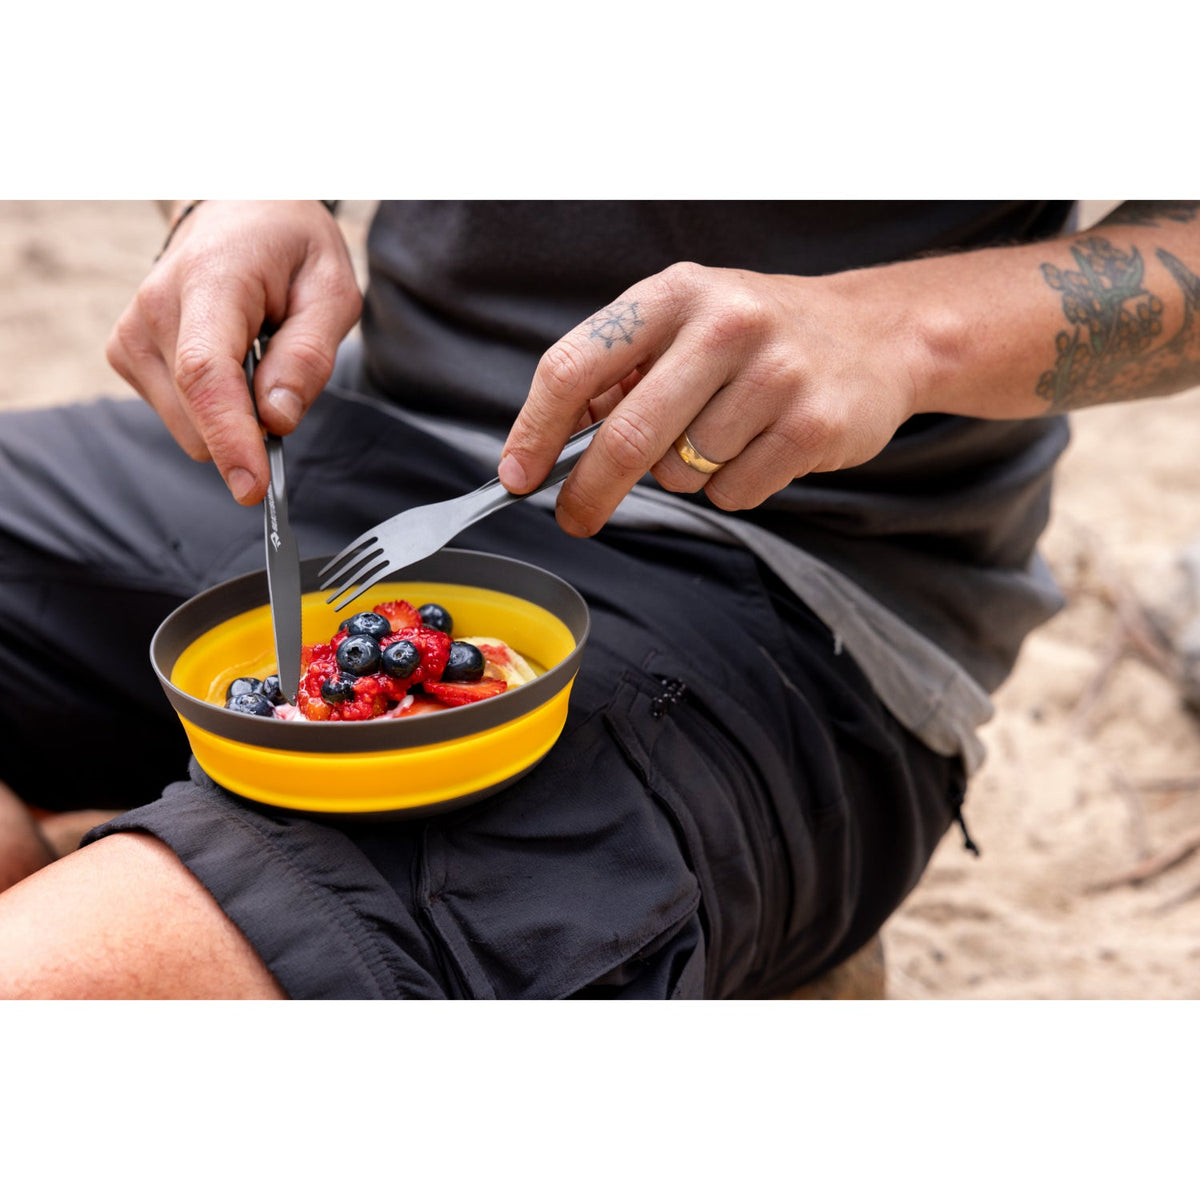 Sea to Summit Frontier Ultralight Collapsible Dinnerware Set (2 Person 6 Piece)